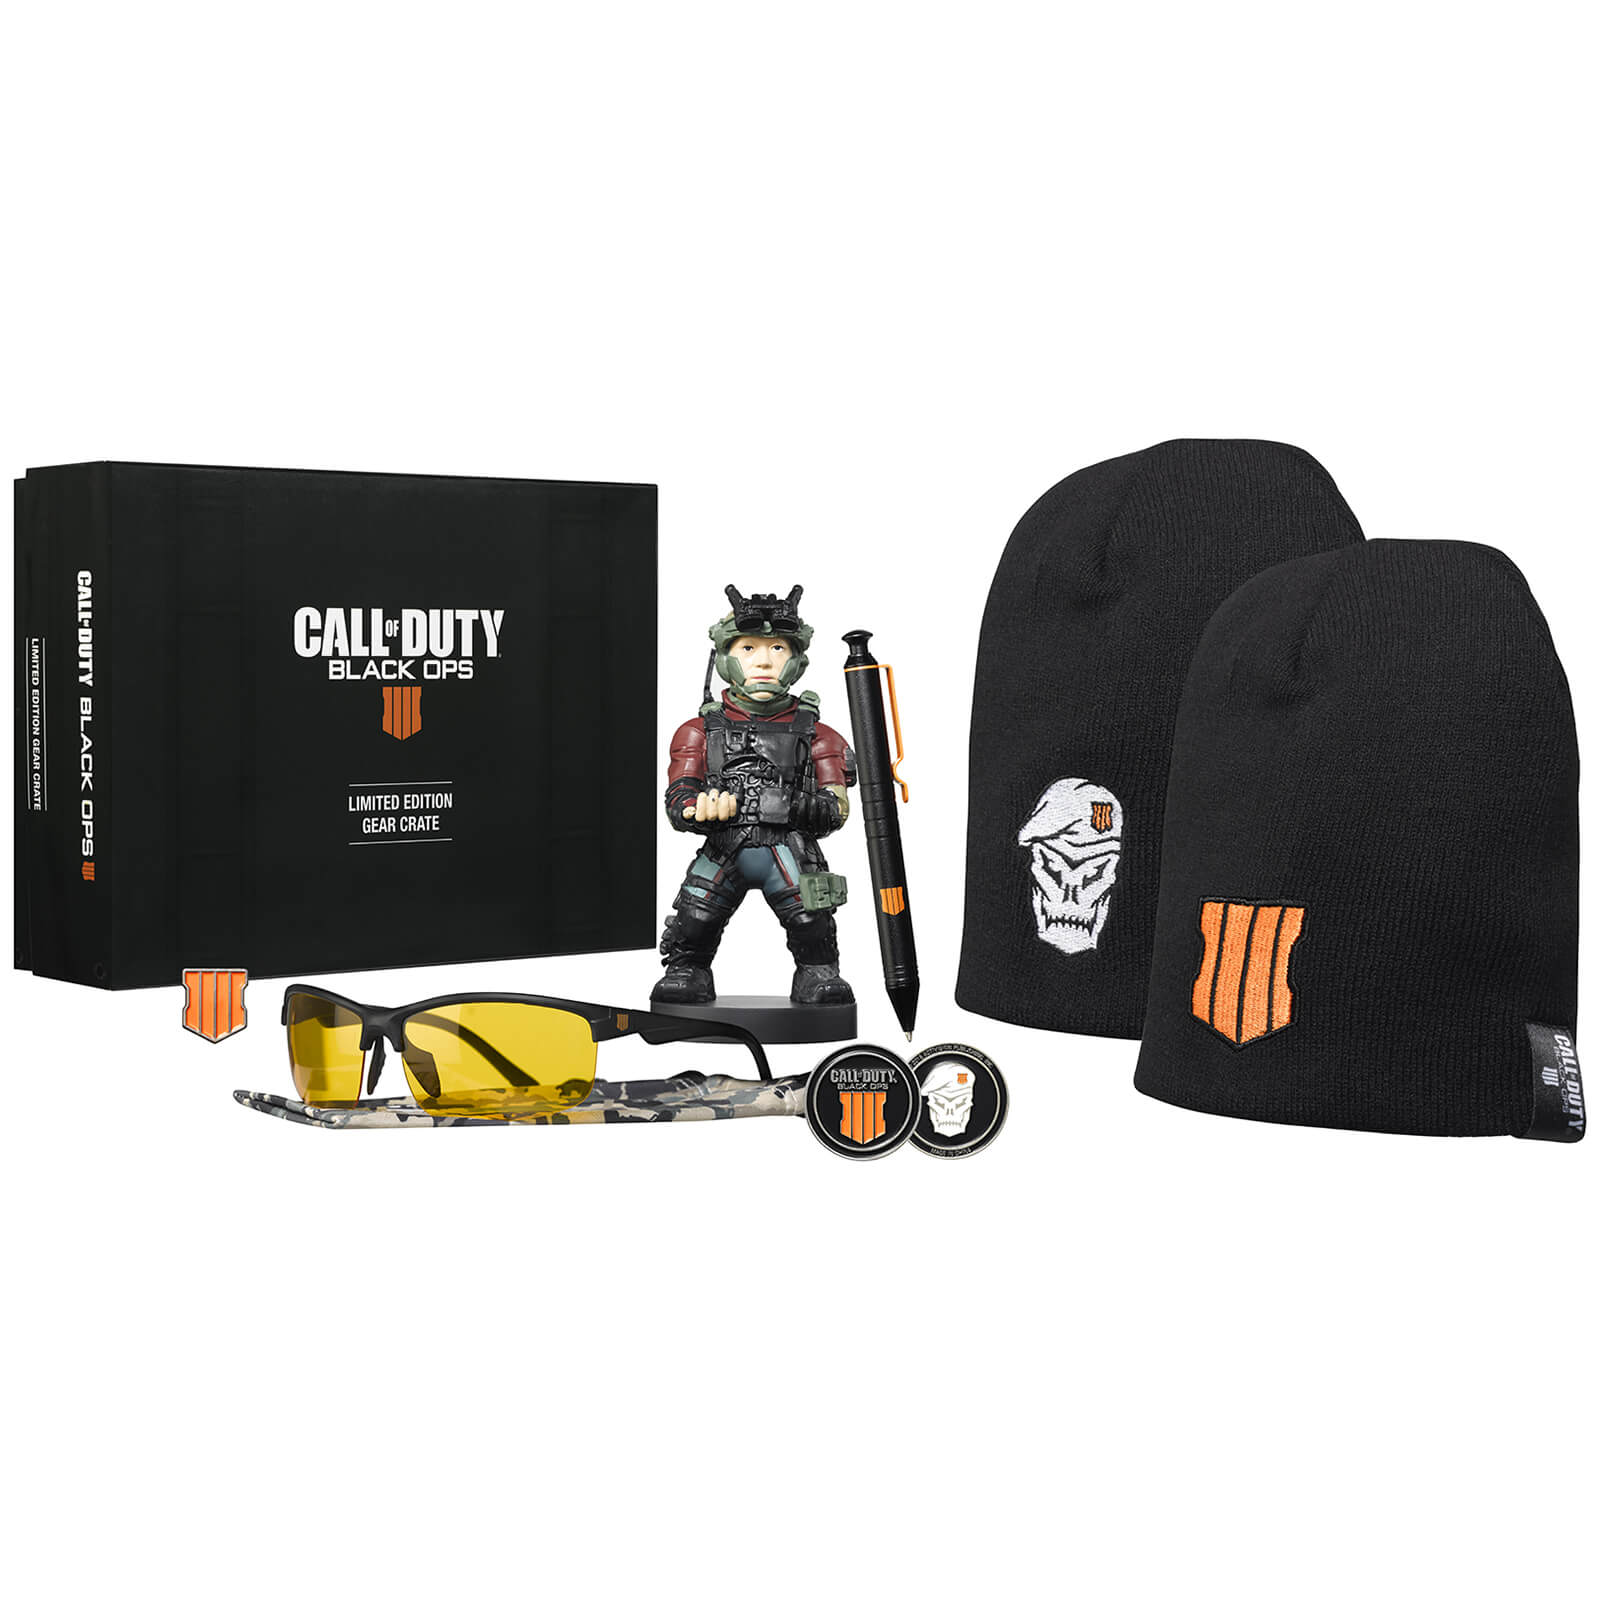 Image of Call of Duty Black Ops IV Collectable Big Box - Includes Mini Cable Guy